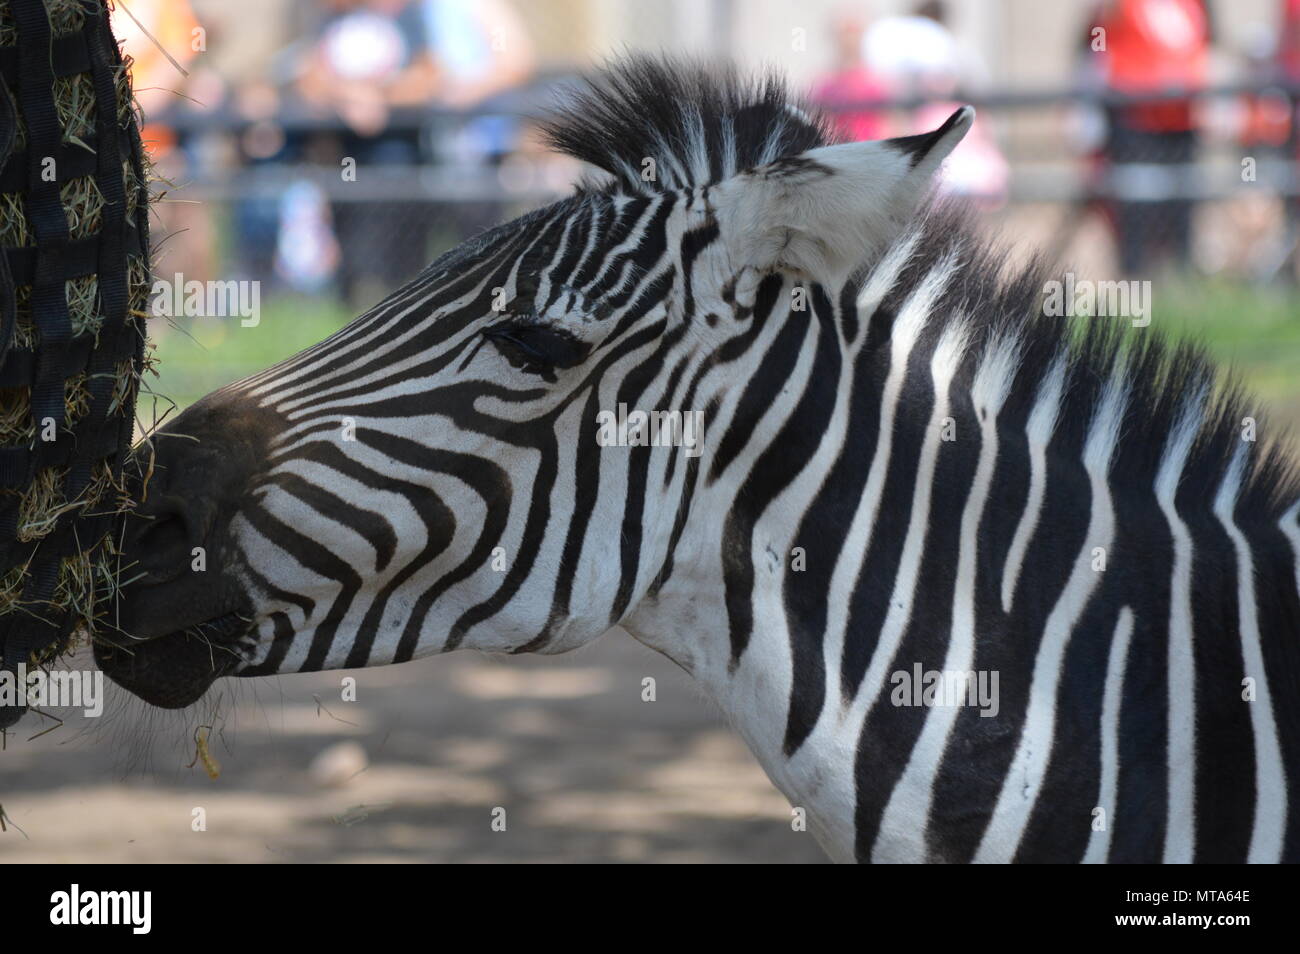 Zebra eating out of a feed bag Stock Photo